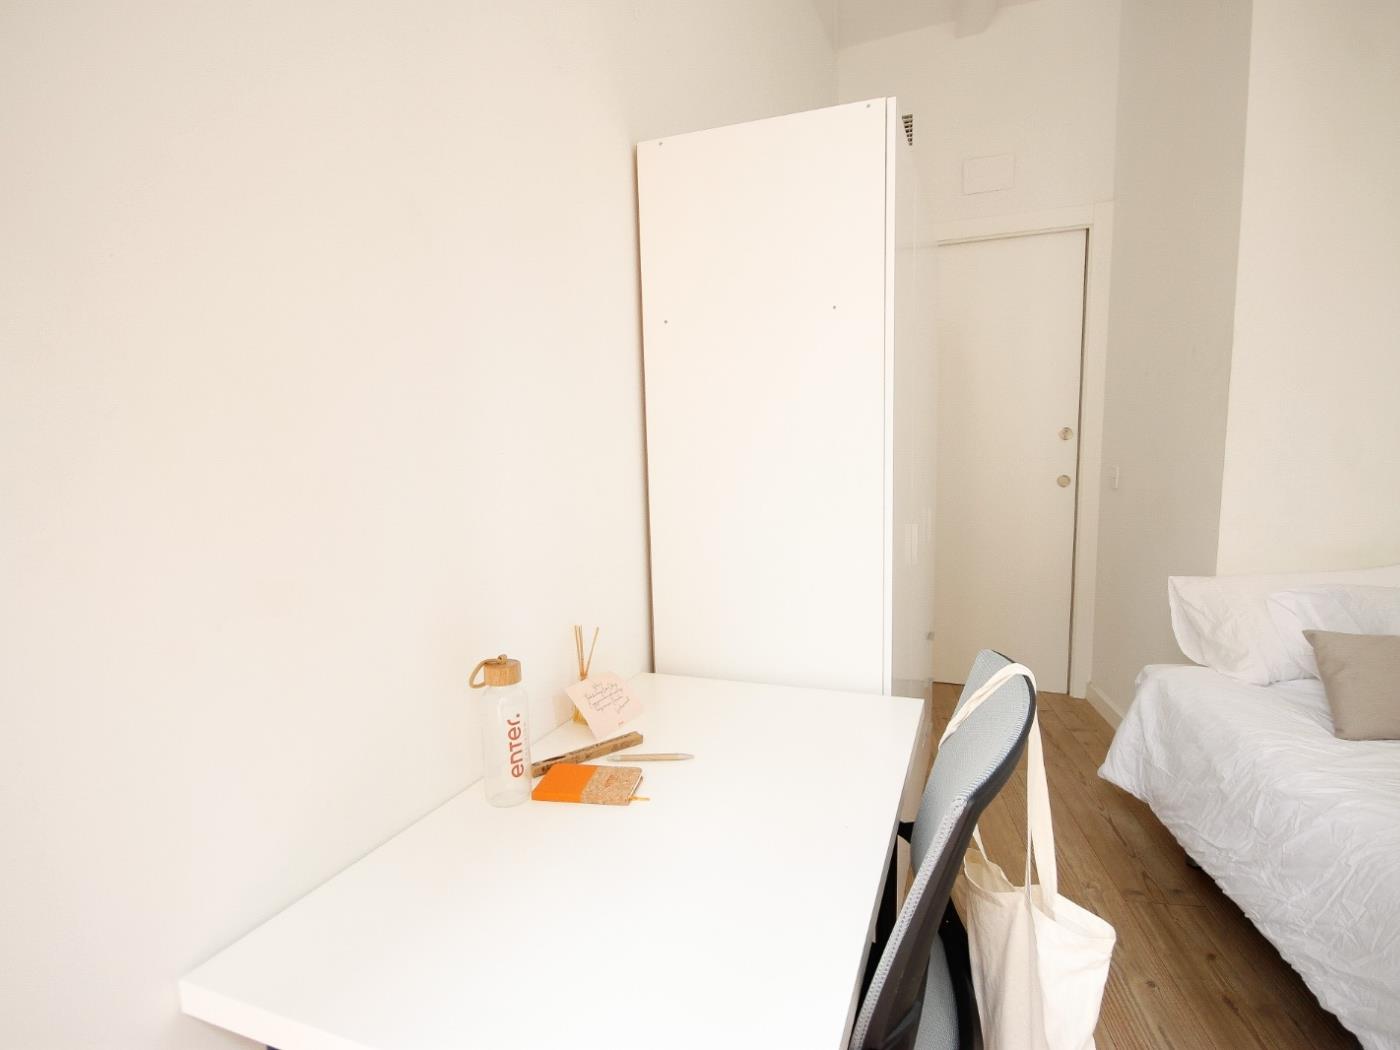 Room for rent near Paralel metro station - My Space Barcelona Apartments